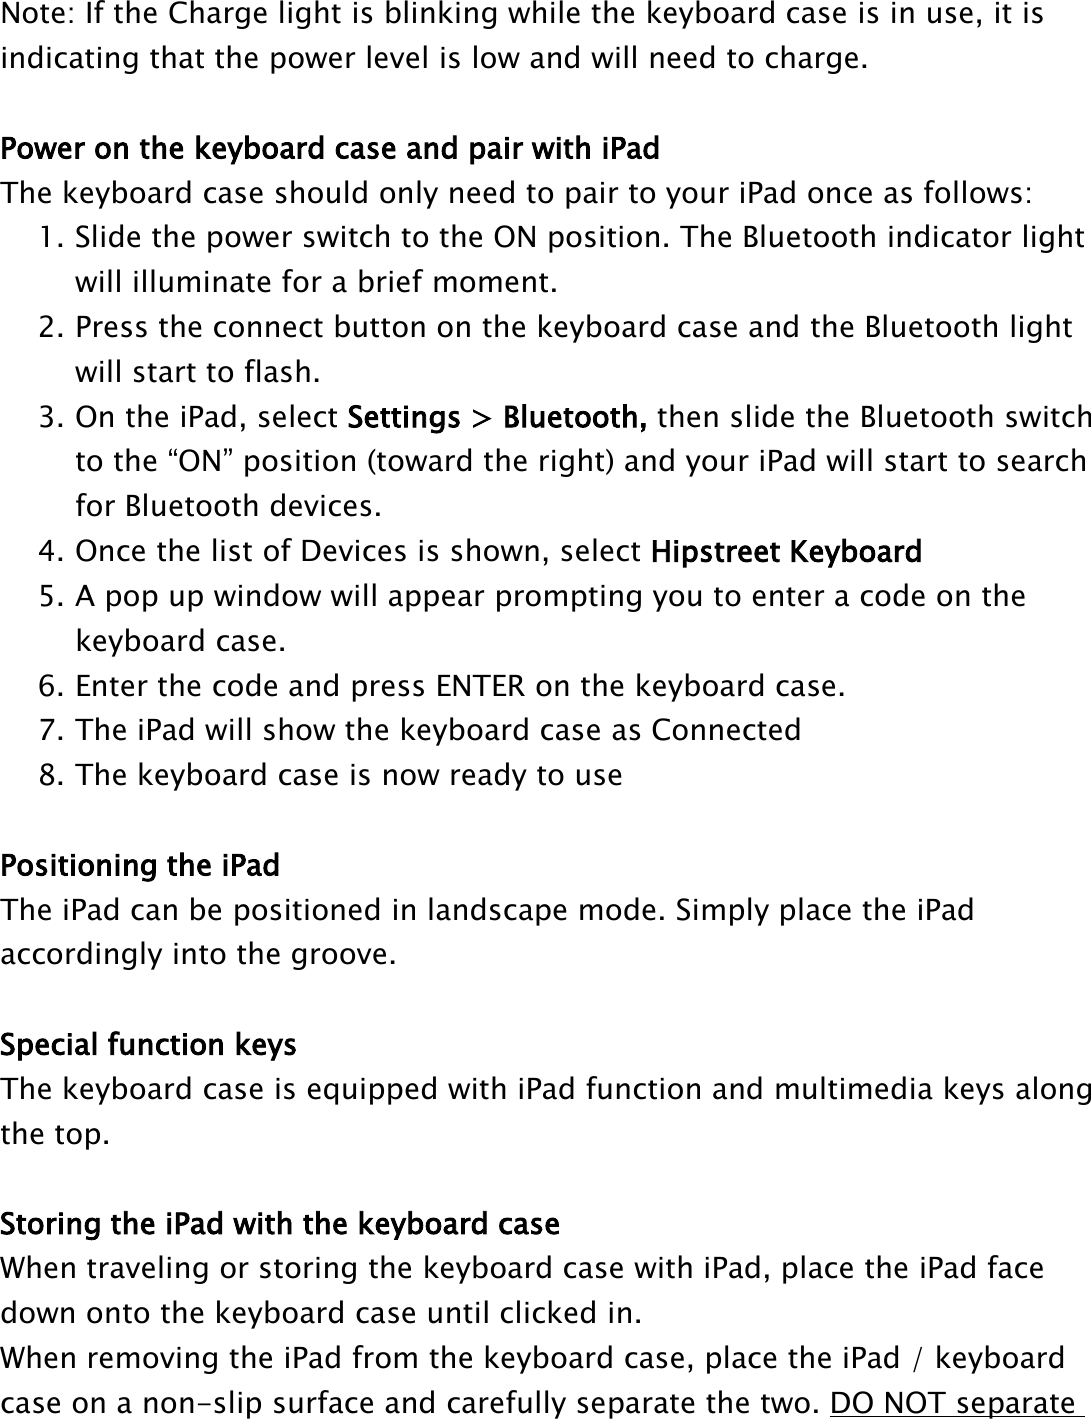 Note: If the Charge light is blinking while the keyboard case is in use, it isindicating that the power level is low and will need to charge.Power on the keyboard case and pair with iPadThe keyboard case should only need to pair to your iPad once as follows:1. Slide the power switch to the ON position. The Bluetooth indicator lightwill illuminate for a brief moment.2. Press the connect button on the keyboard case and the Bluetooth lightwill start to flash.3. On the iPad, select Settings &gt; Bluetooth, then slide the Bluetooth switchto the “ON” position (toward the right) and your iPad will start to searchfor Bluetooth devices.4. Once the list of Devices is shown, select Hipstreet Keyboard5. A pop up window will appear prompting you to enter a code on thekeyboard case.6. Enter the code and press ENTER on the keyboard case.7. The iPad will show the keyboard case as Connected8. The keyboard case is now ready to usePositioning the iPadThe iPad can be positioned in landscape mode. Simply place the iPadaccordingly into the groove.Special function keysThe keyboard case is equipped with iPad function and multimedia keys alongthe top.Storing the iPad with the keyboard caseWhen traveling or storing the keyboard case with iPad, place the iPad facedown onto the keyboard case until clicked in.When removing the iPad from the keyboard case, place the iPad / keyboardcase on a non-slip surface and carefully separate the two. DO NOT separate